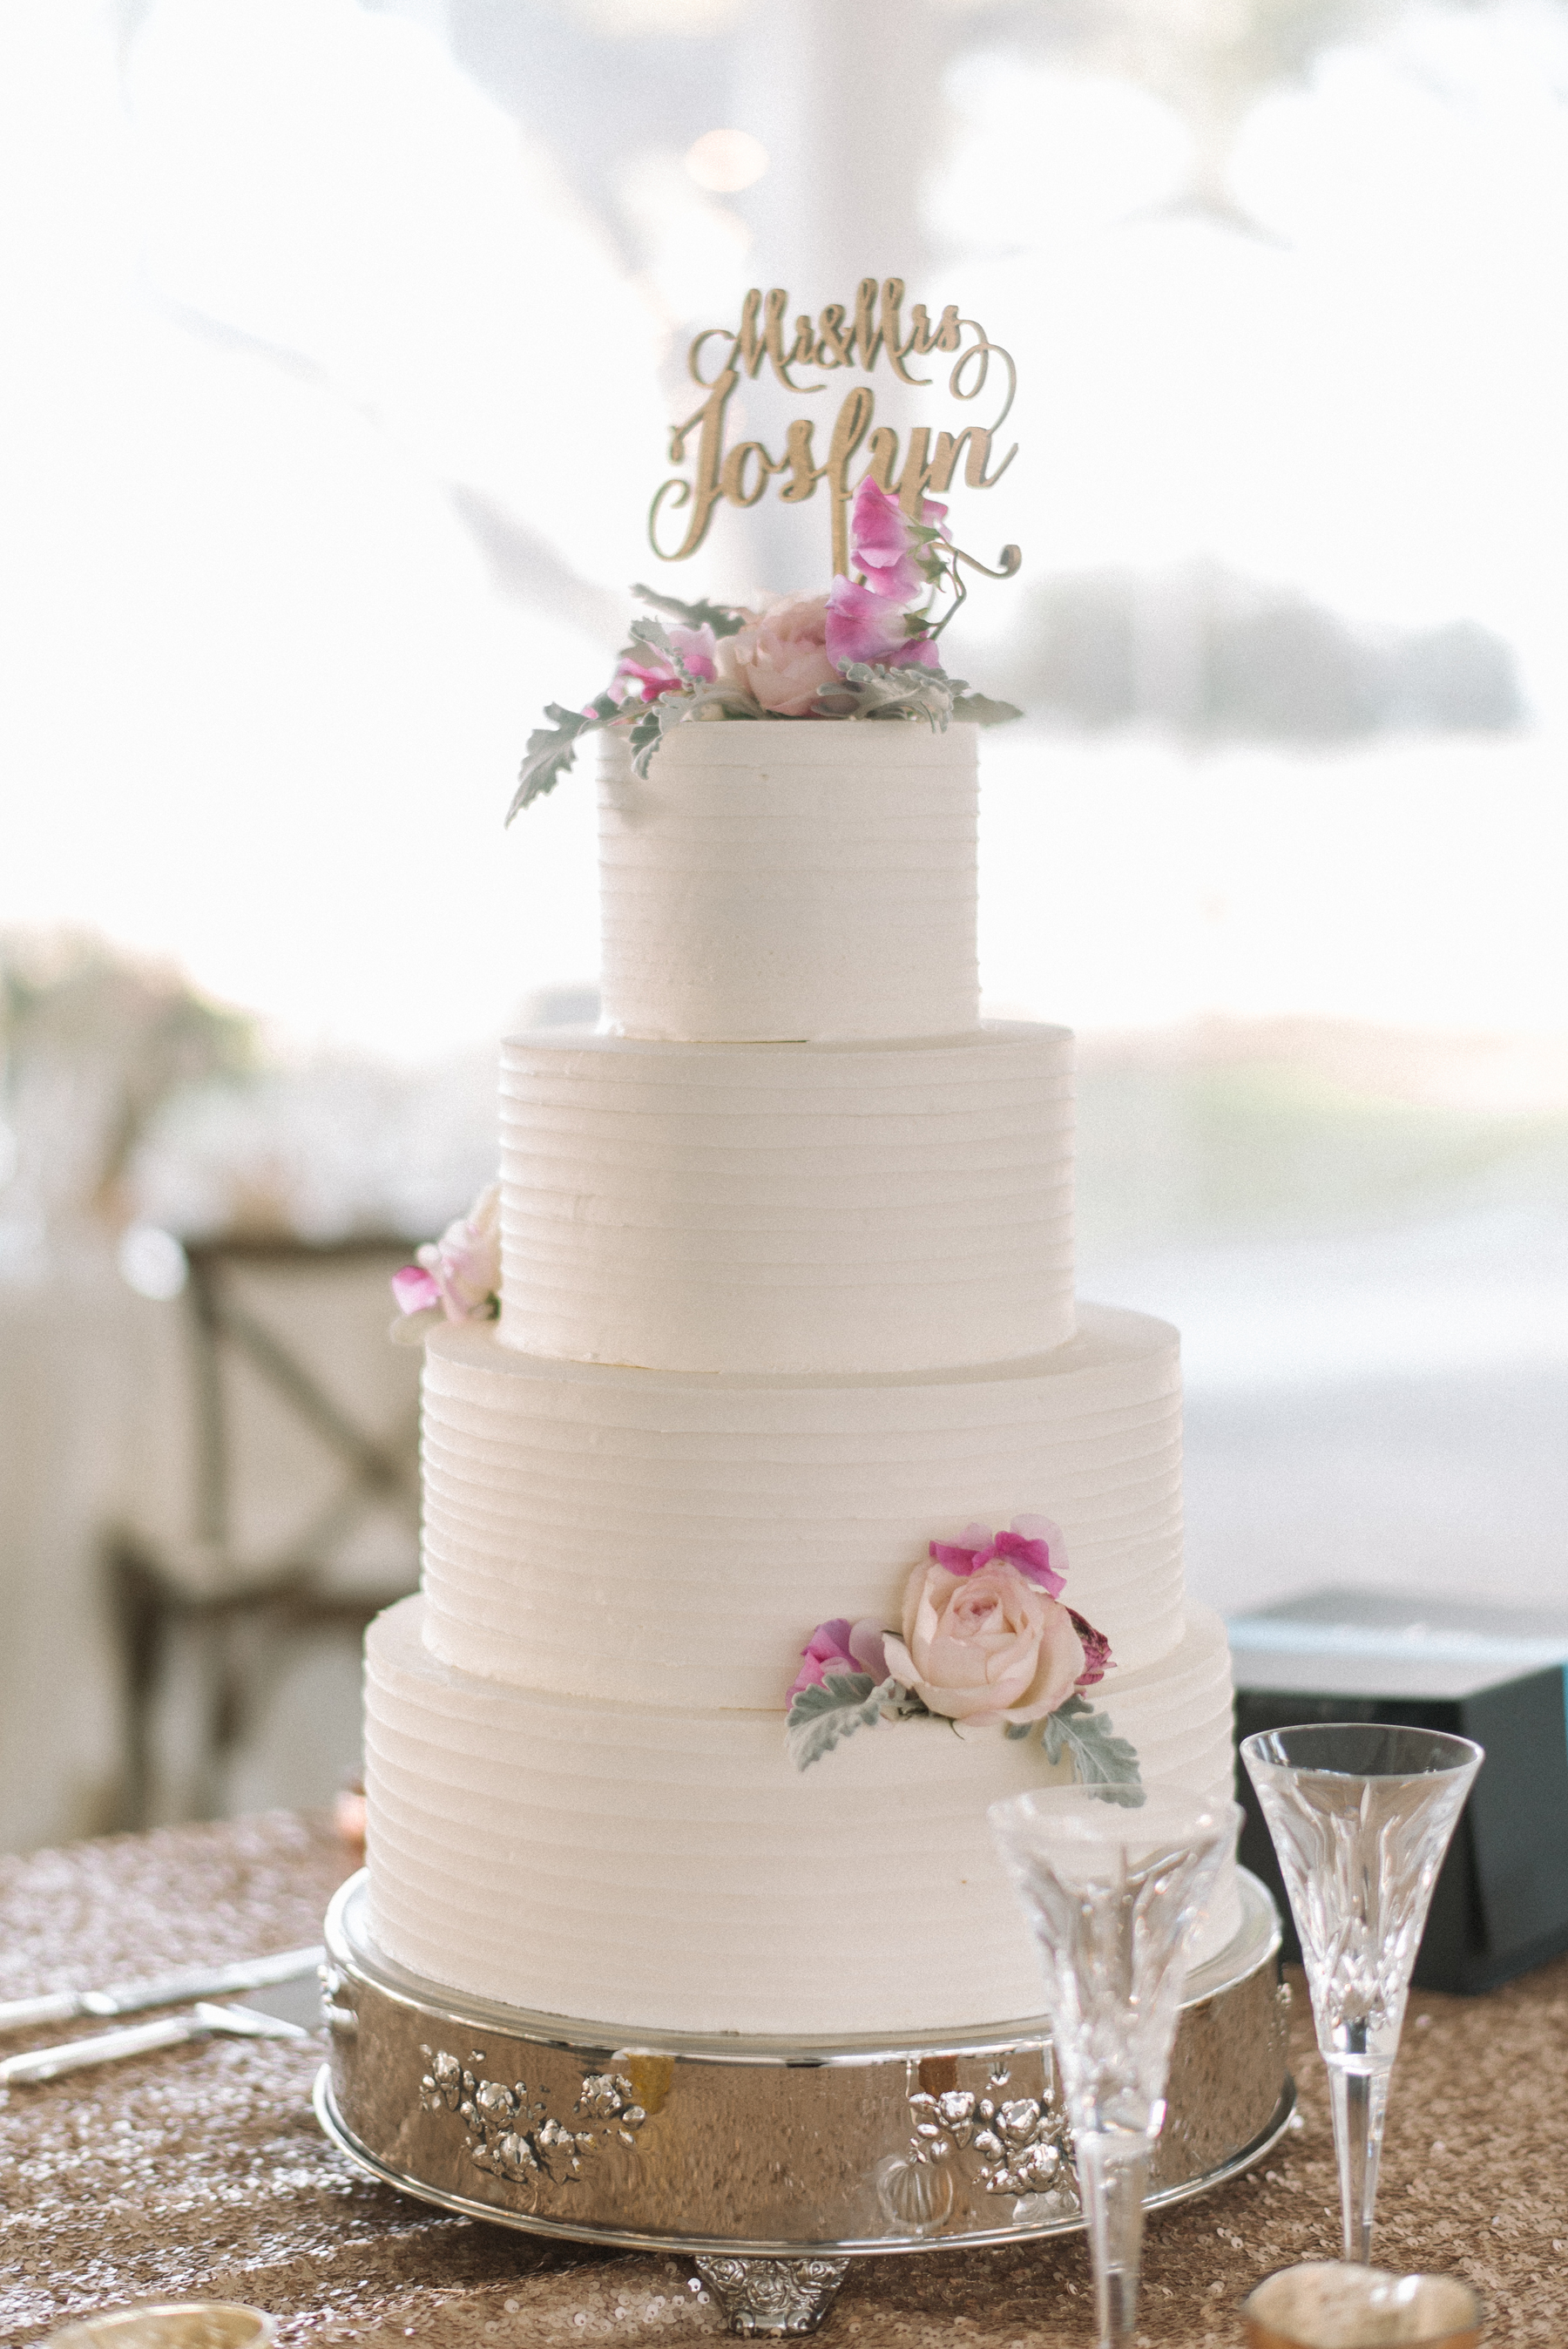 Wedding Cake with Laser Cut Topper